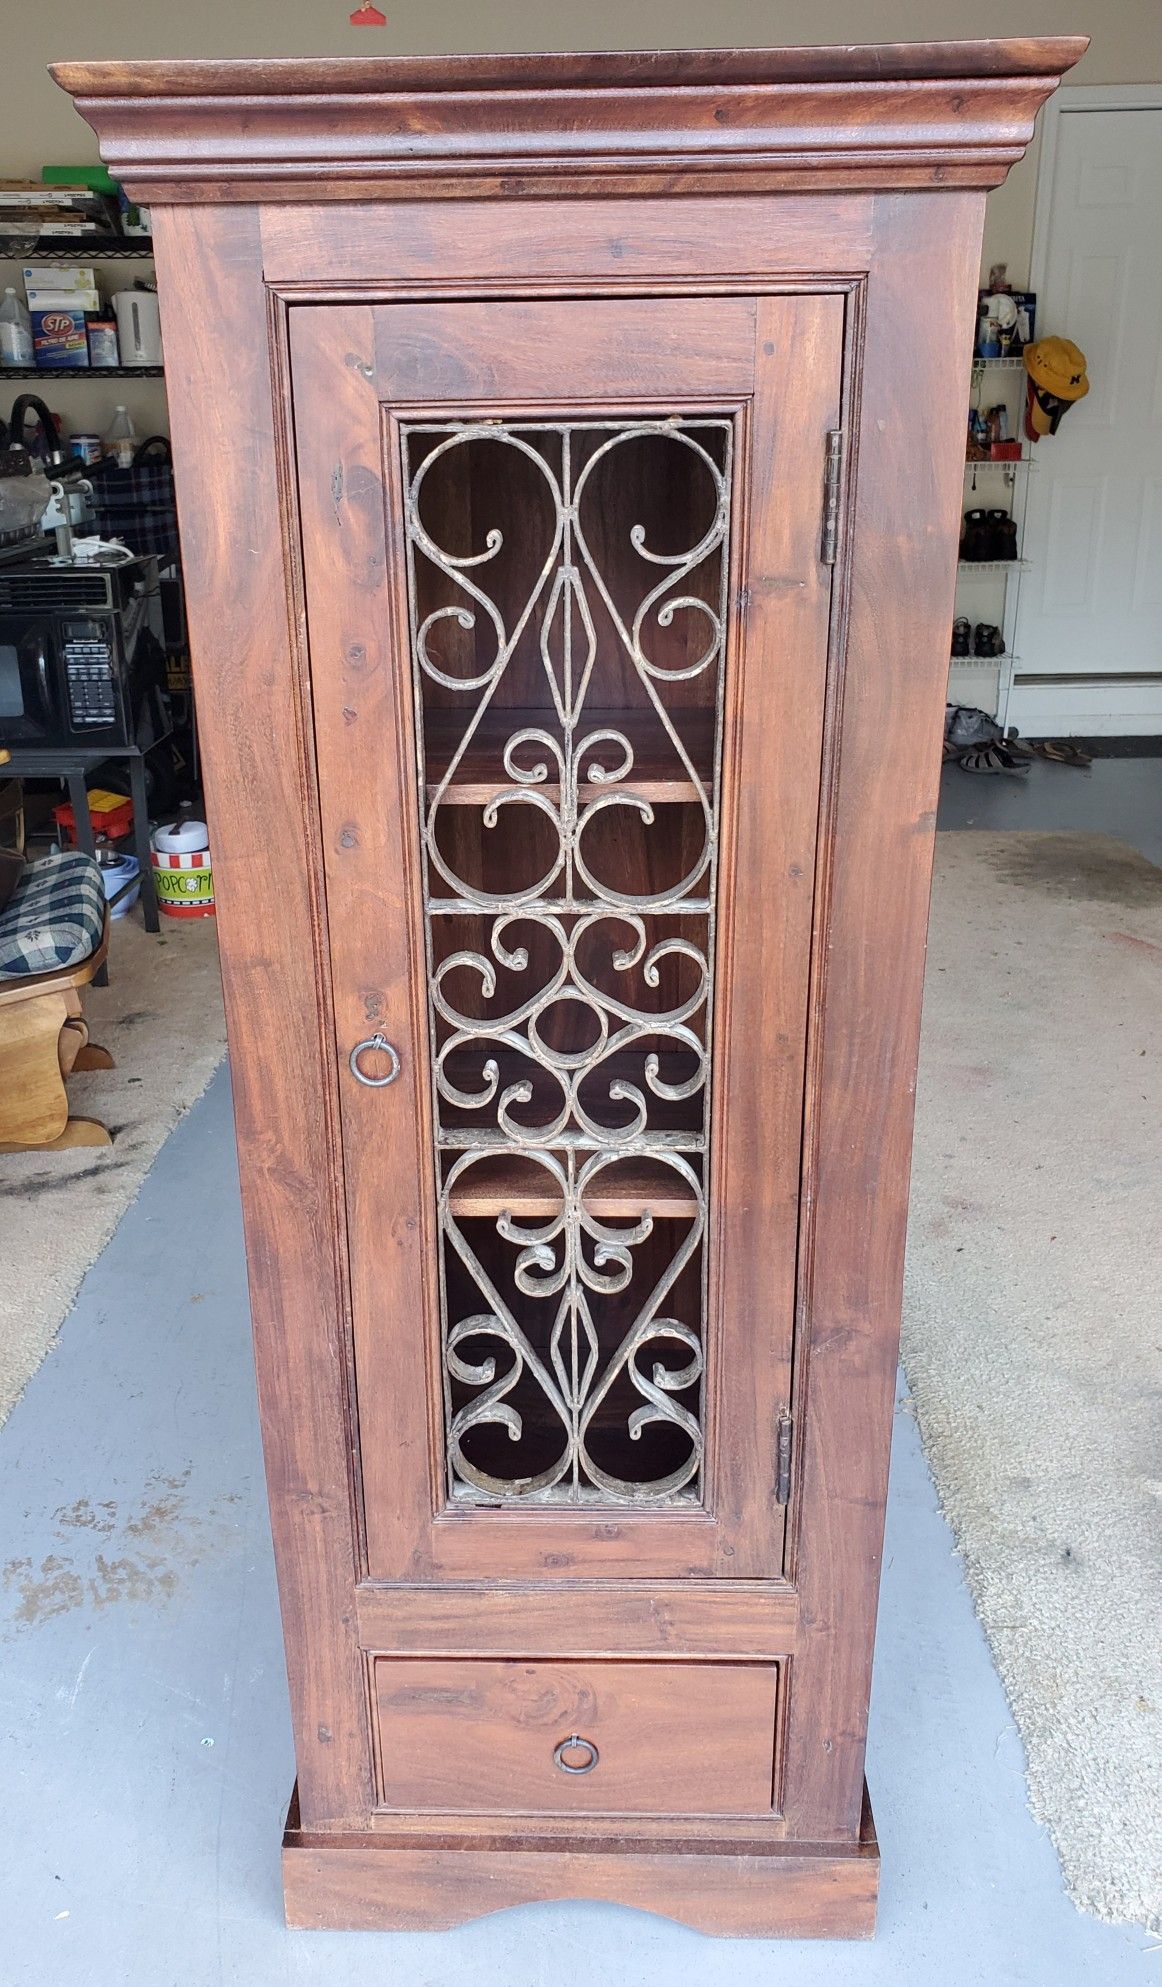 Antique Victorian Style Wood Cabinet with Carved Metal Design Door